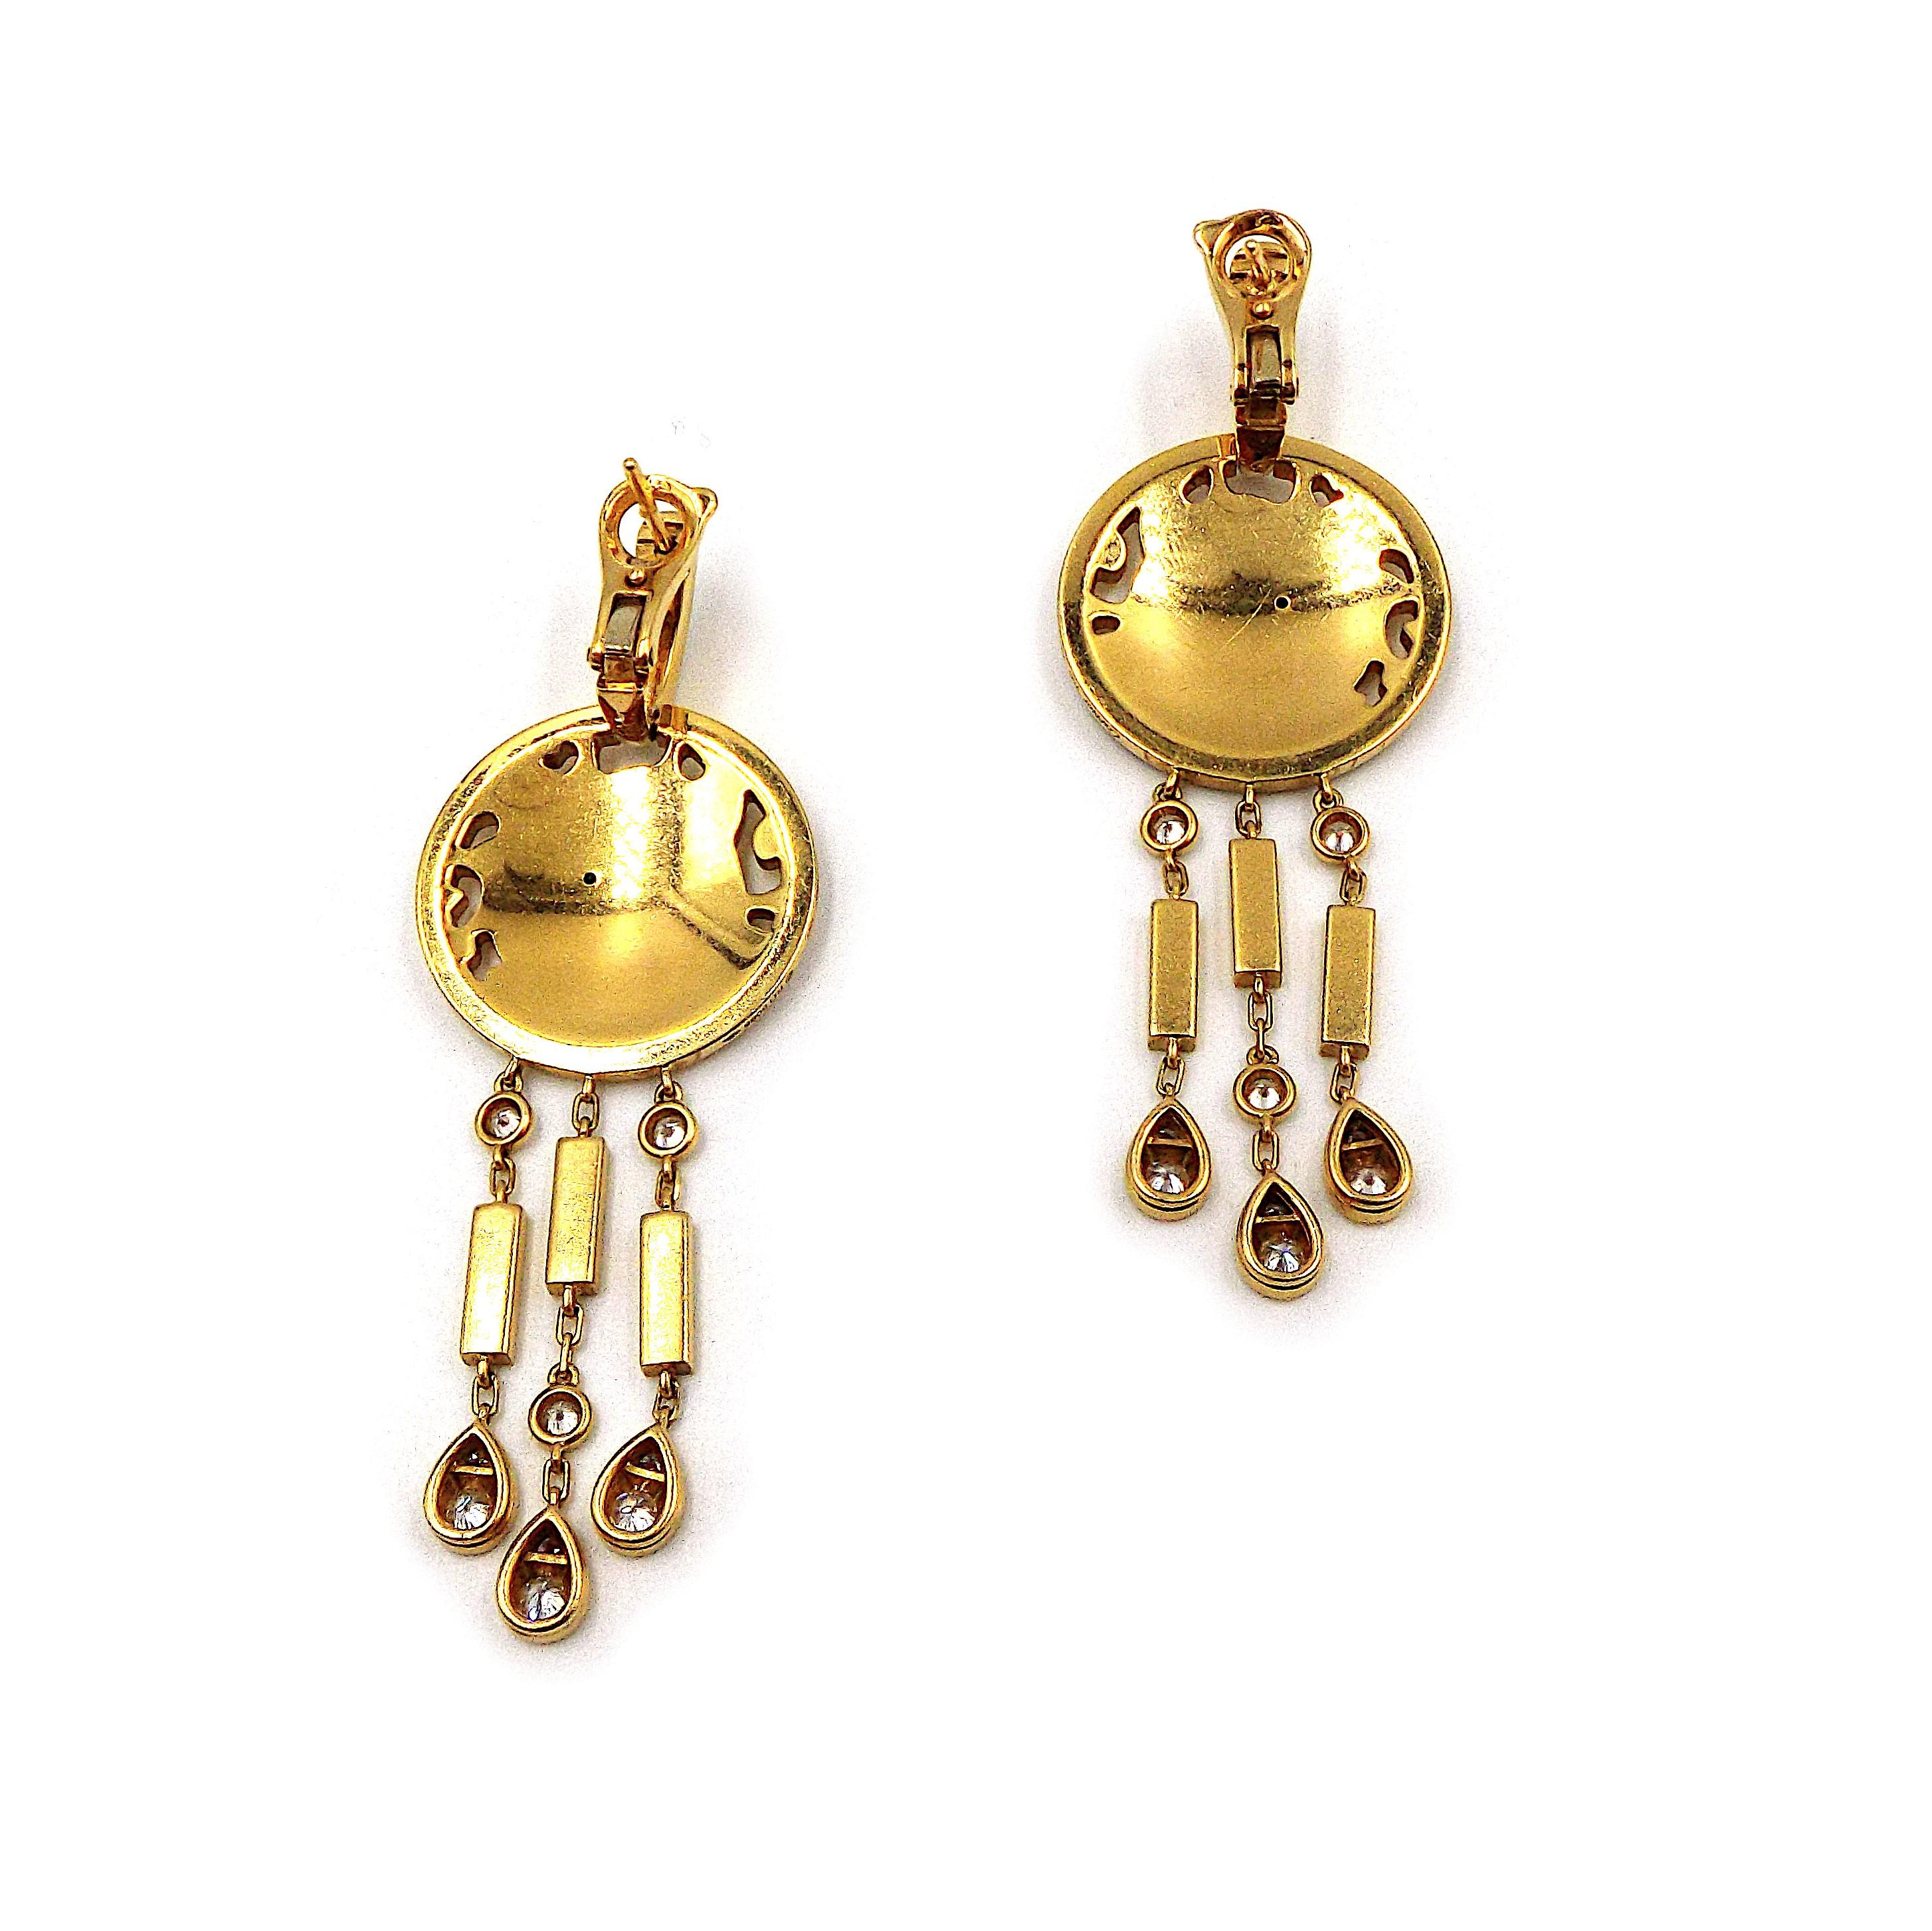 A pair of elegant Cartier earrings from the Panthere collection. 18K yellow gold, emerald eyes, lacquer. Dimensions 2 3/8